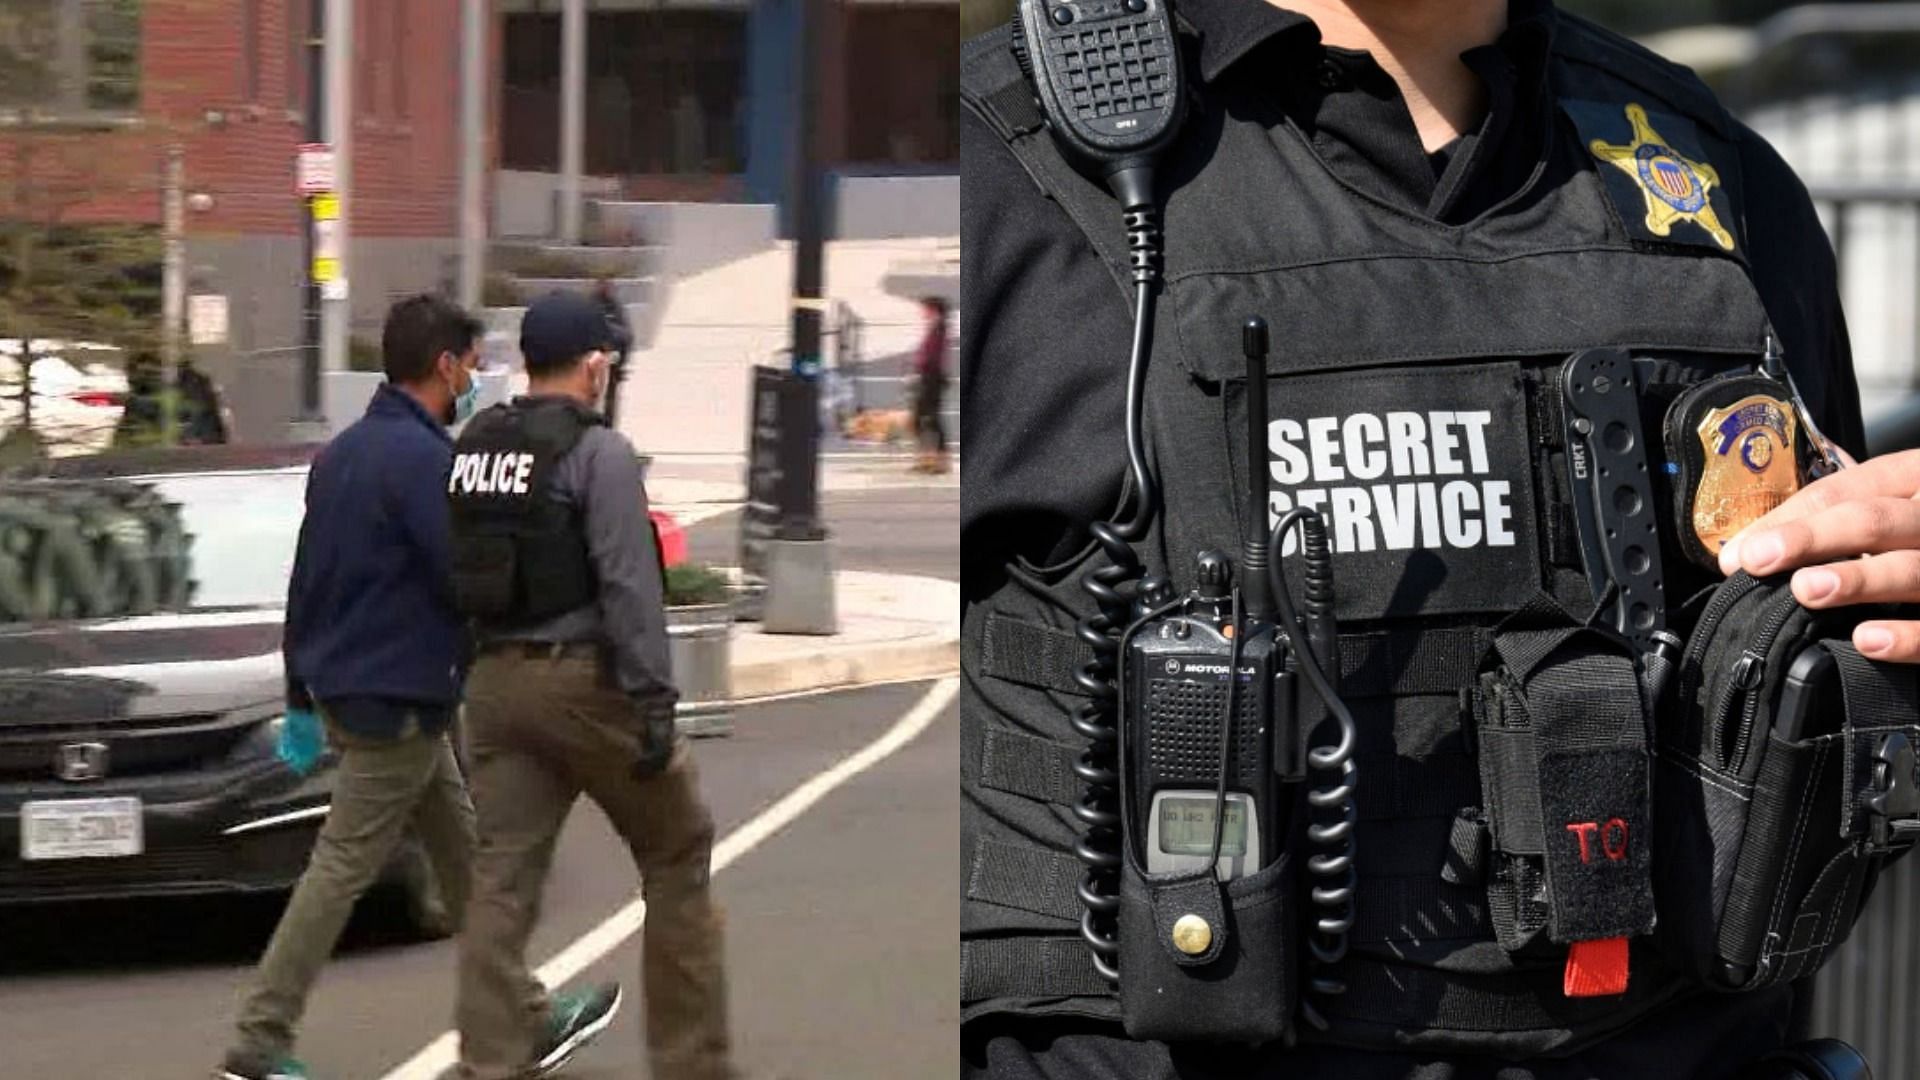 Fake Secret Service agents Arian Taherzadeh and Haider Ali were arrested for impersonating as DHS officials (Image via Lorenzo Hall/Twitter &amp; Robert Alexander/Getty Images)